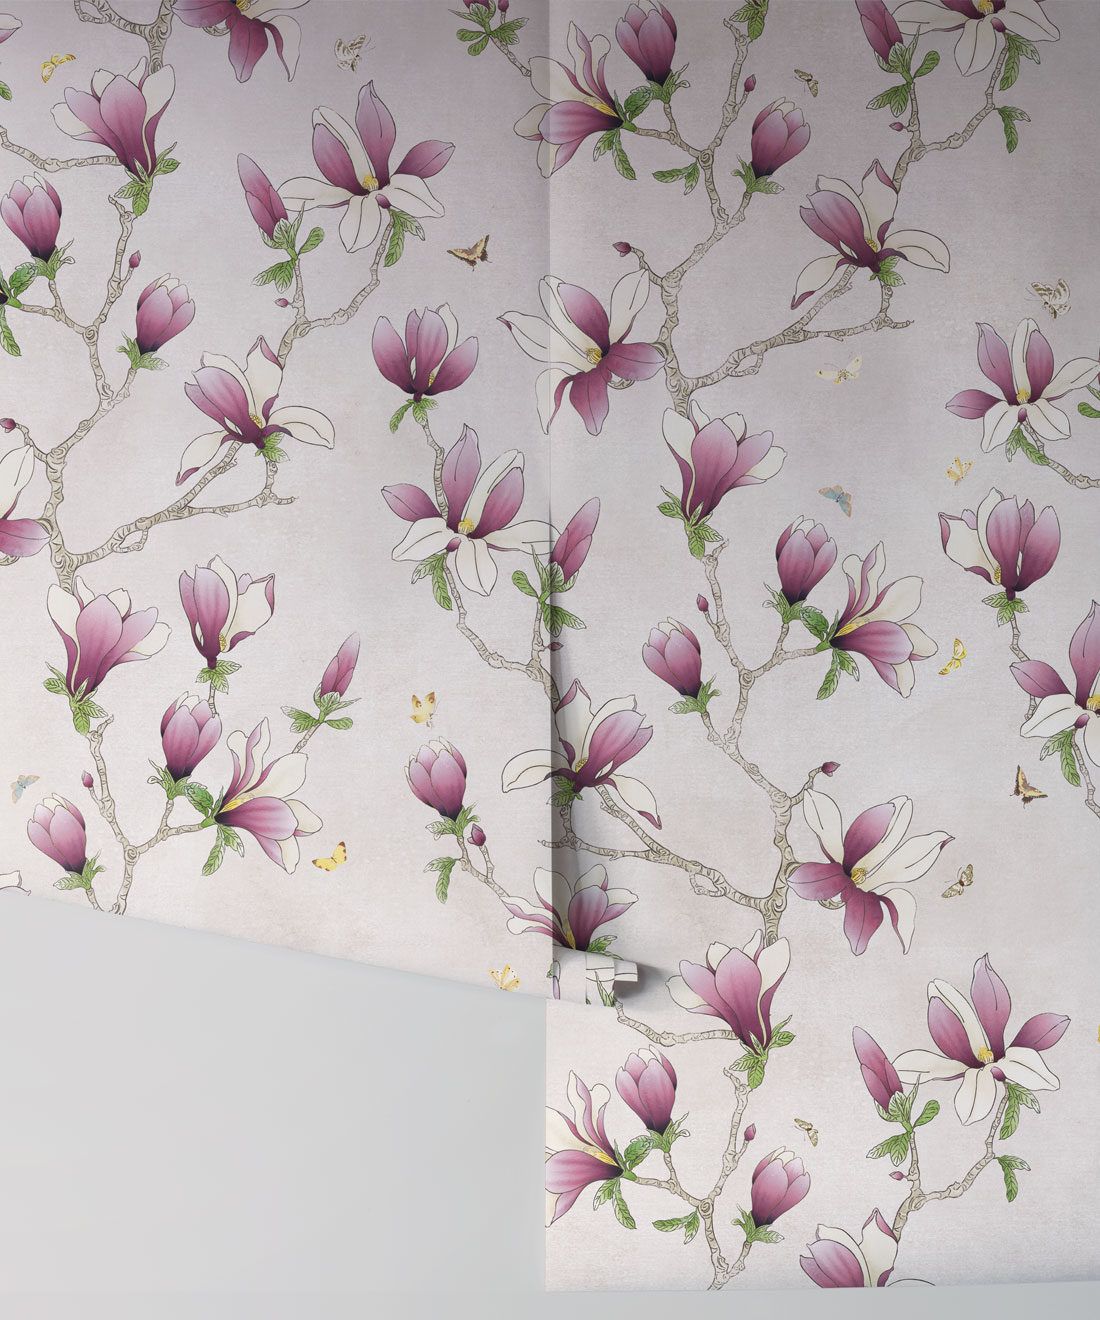 CHINESE FLORAL Wallpaper Sample - Wallpaper samples - Wallpaper - Products